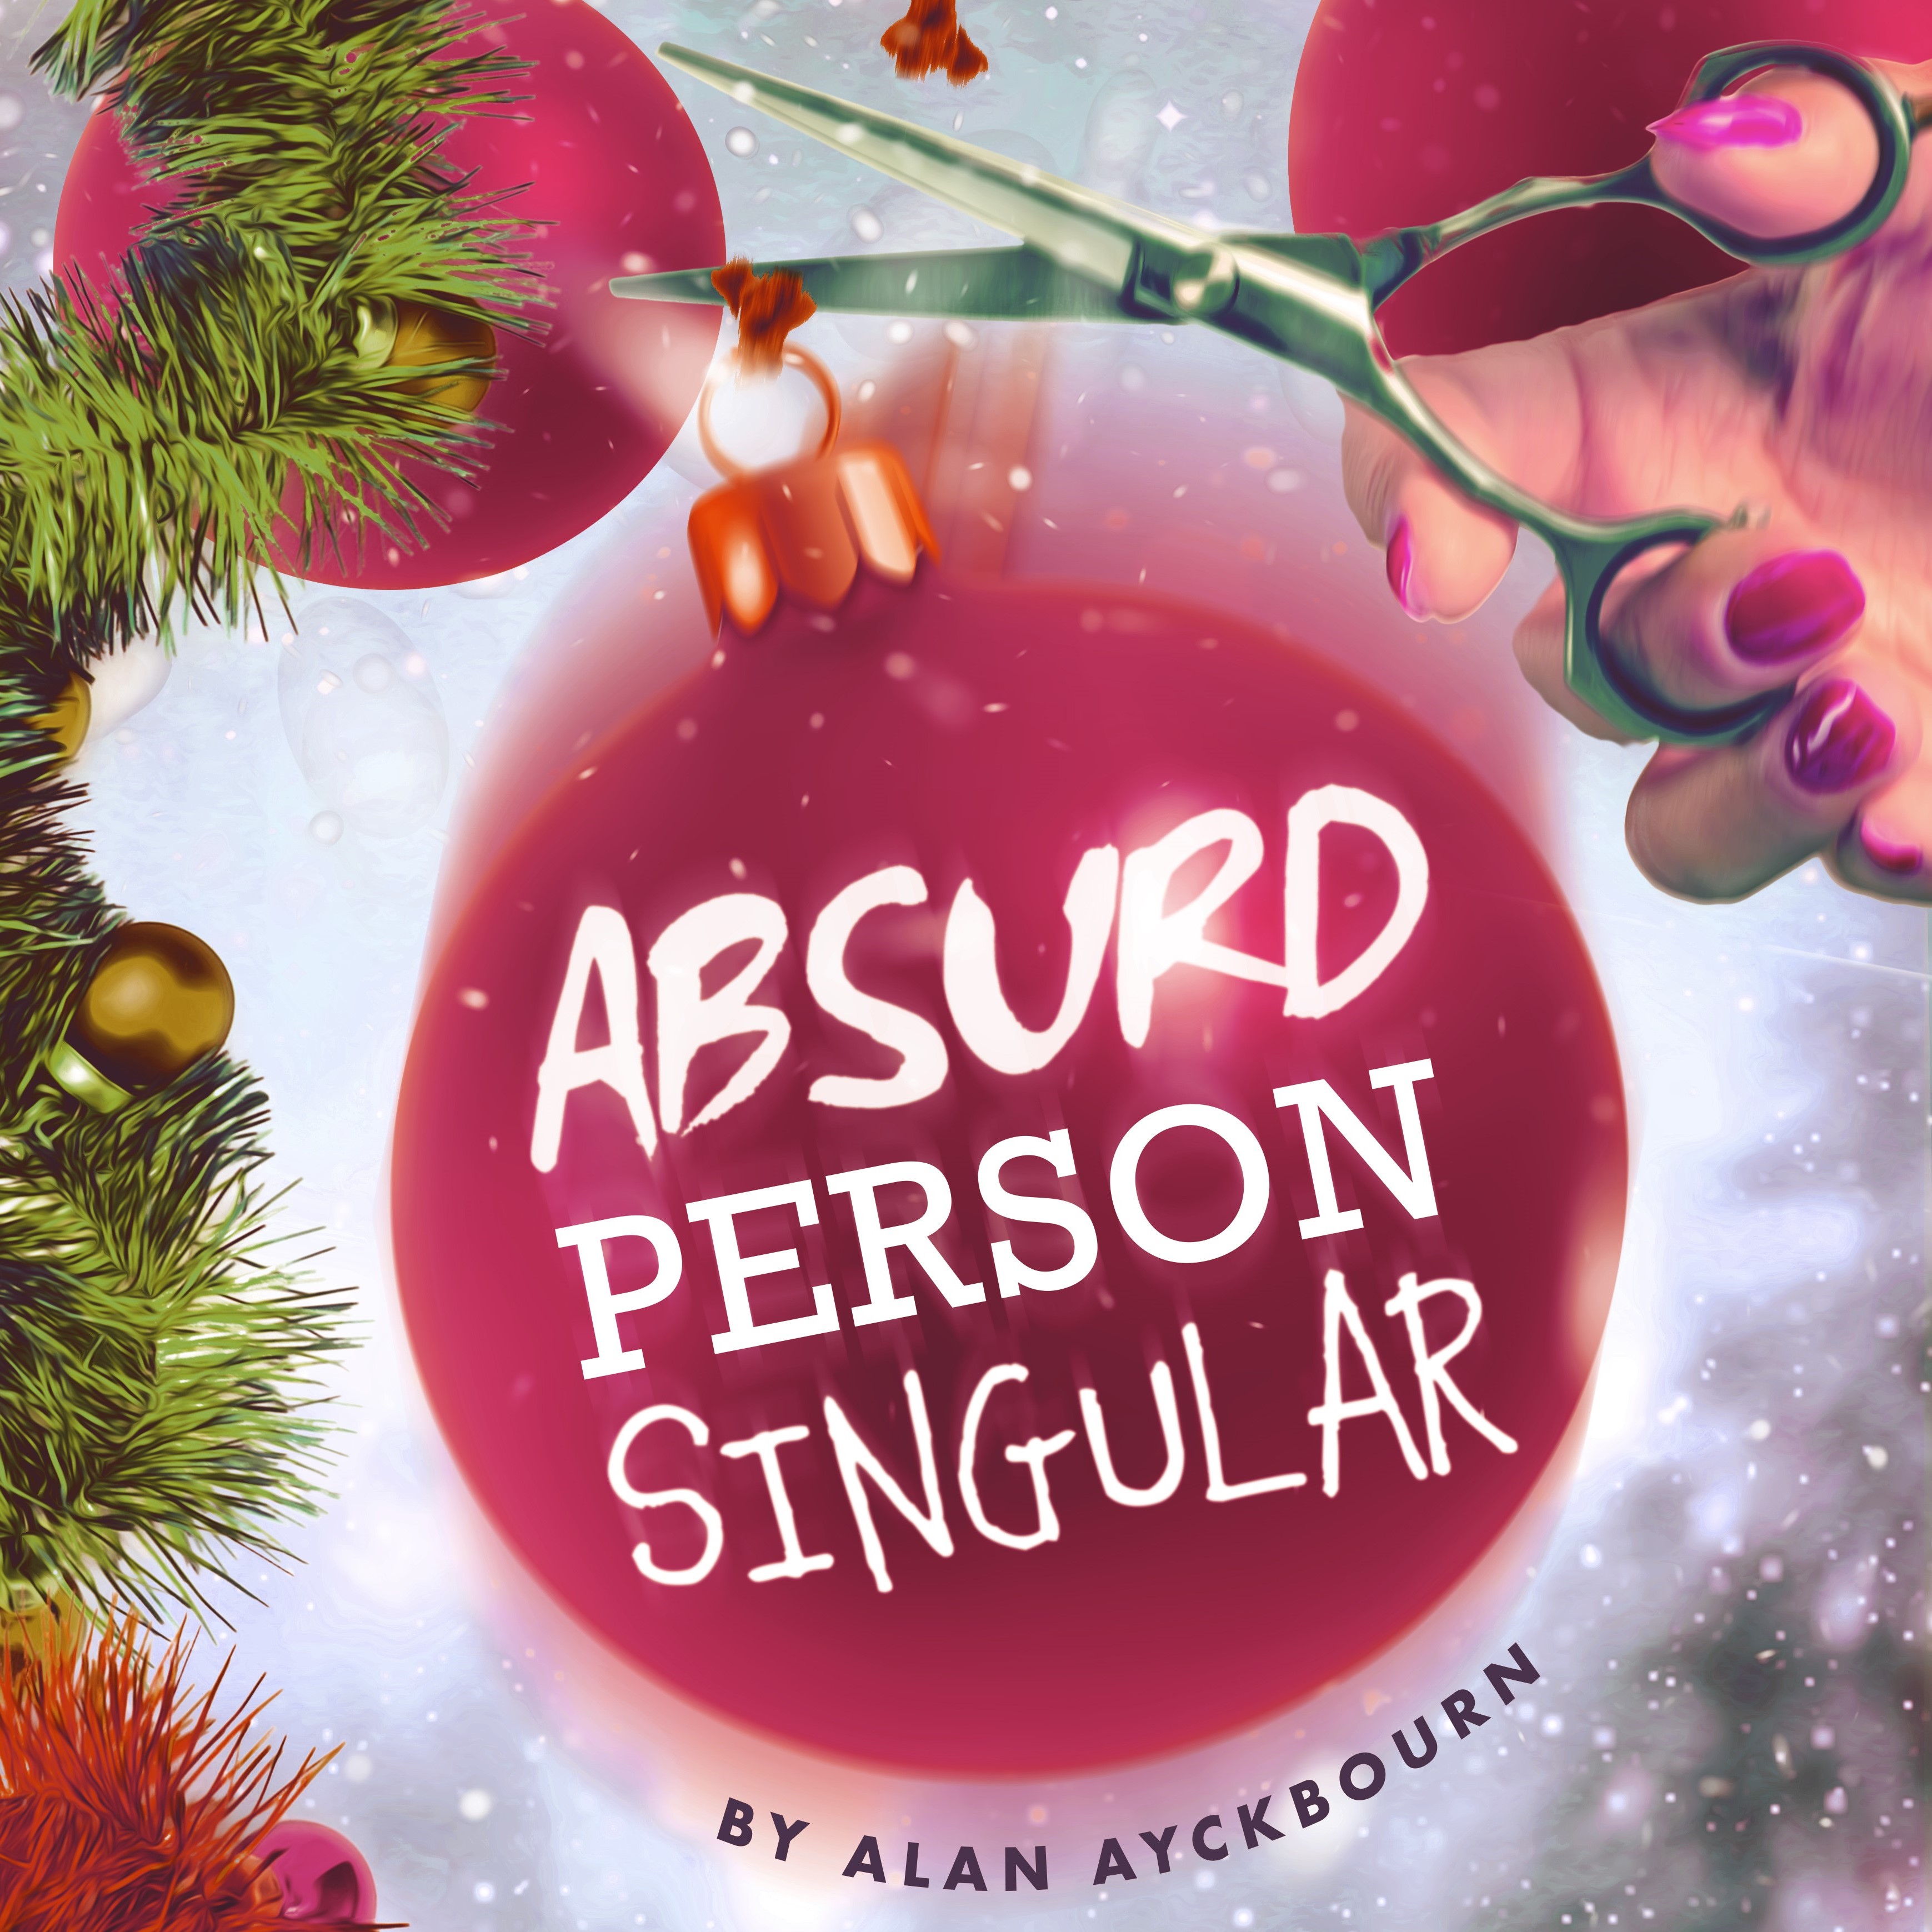 Absurd Person Singular logo on a Christmas ornament getting cut from the tree by a female hand with scissors